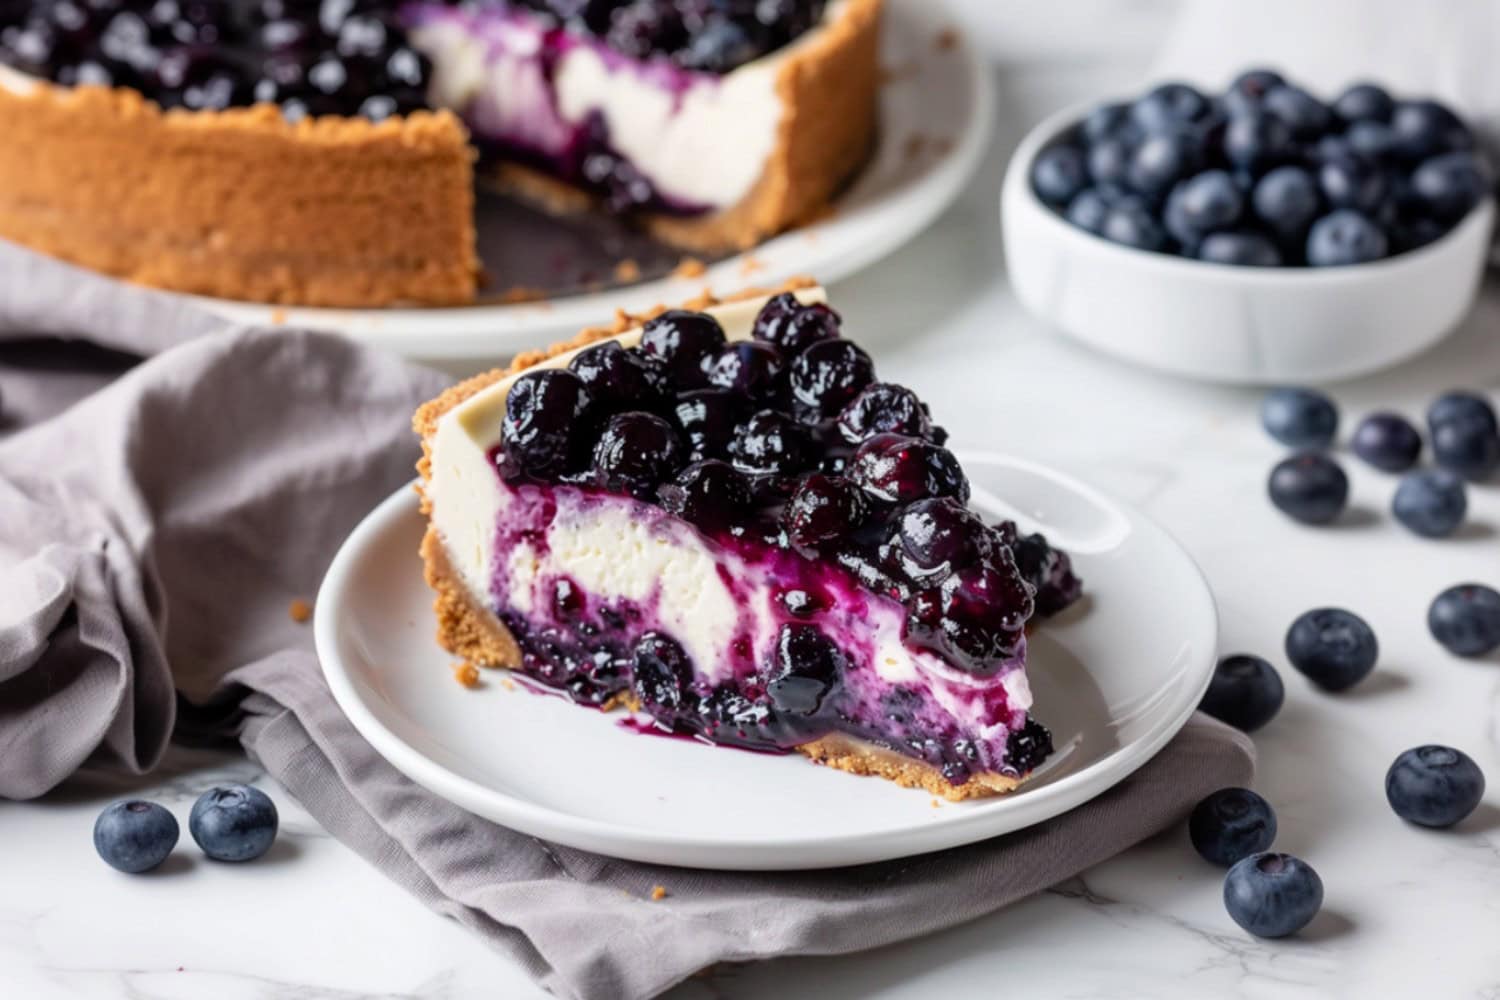 Lemon Blueberry Cheesecake slice in a white plate.